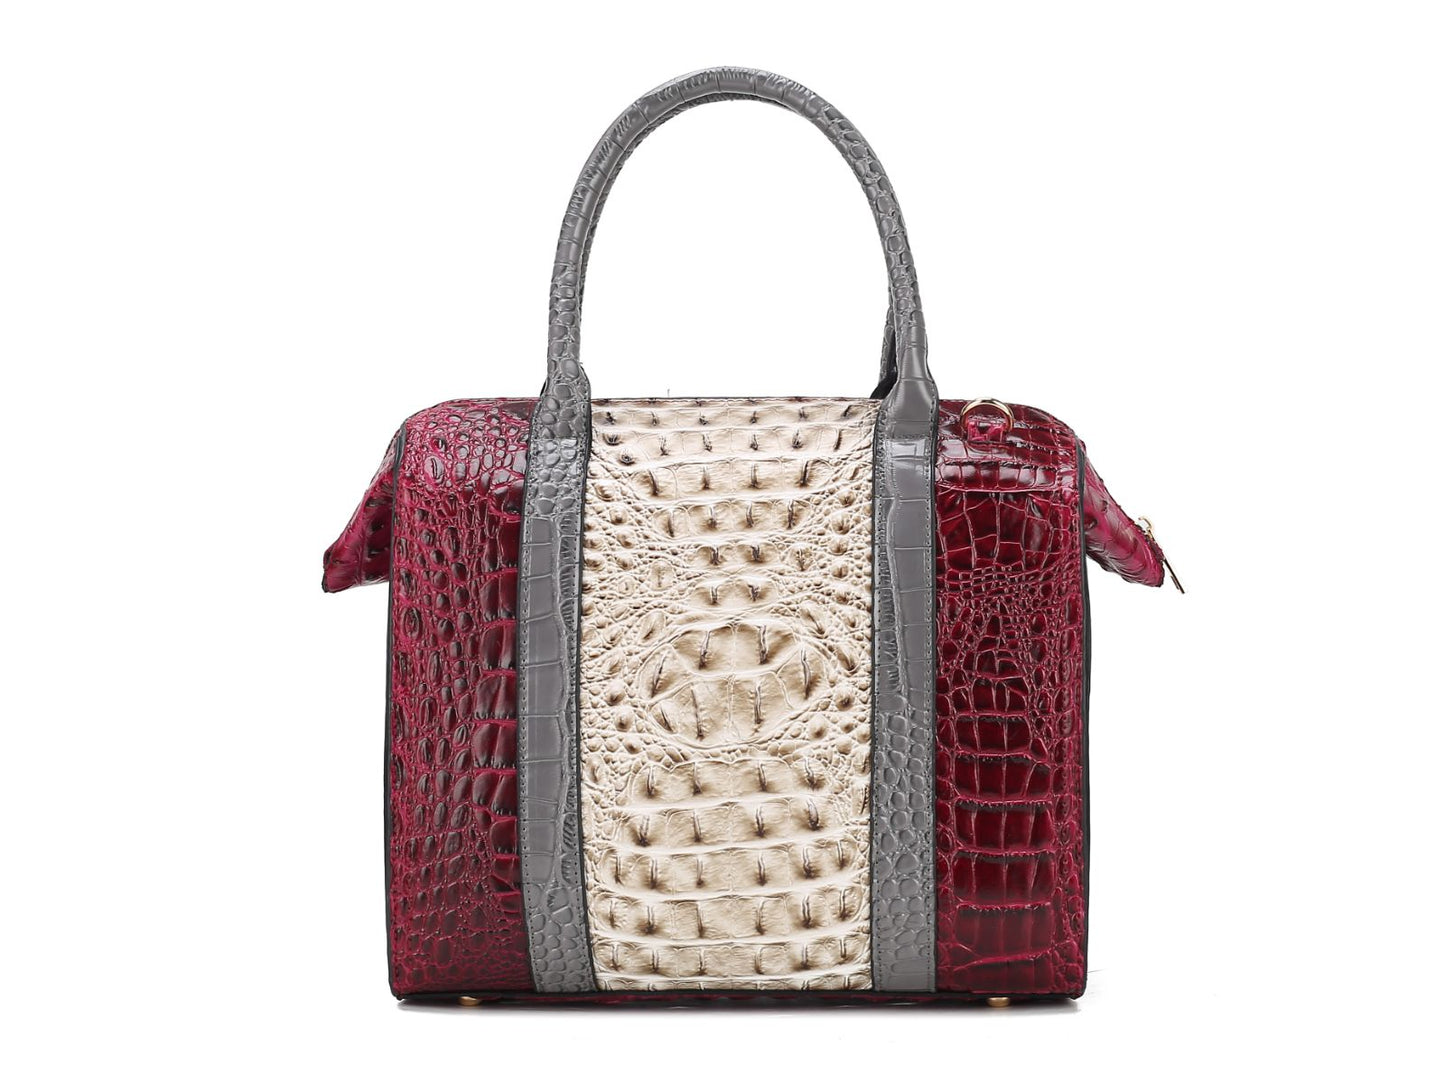 An Ember Faux Crocodile-Embossed Vegan Leather Women’s Satchel from Pink Orpheus with an adjustable strap.